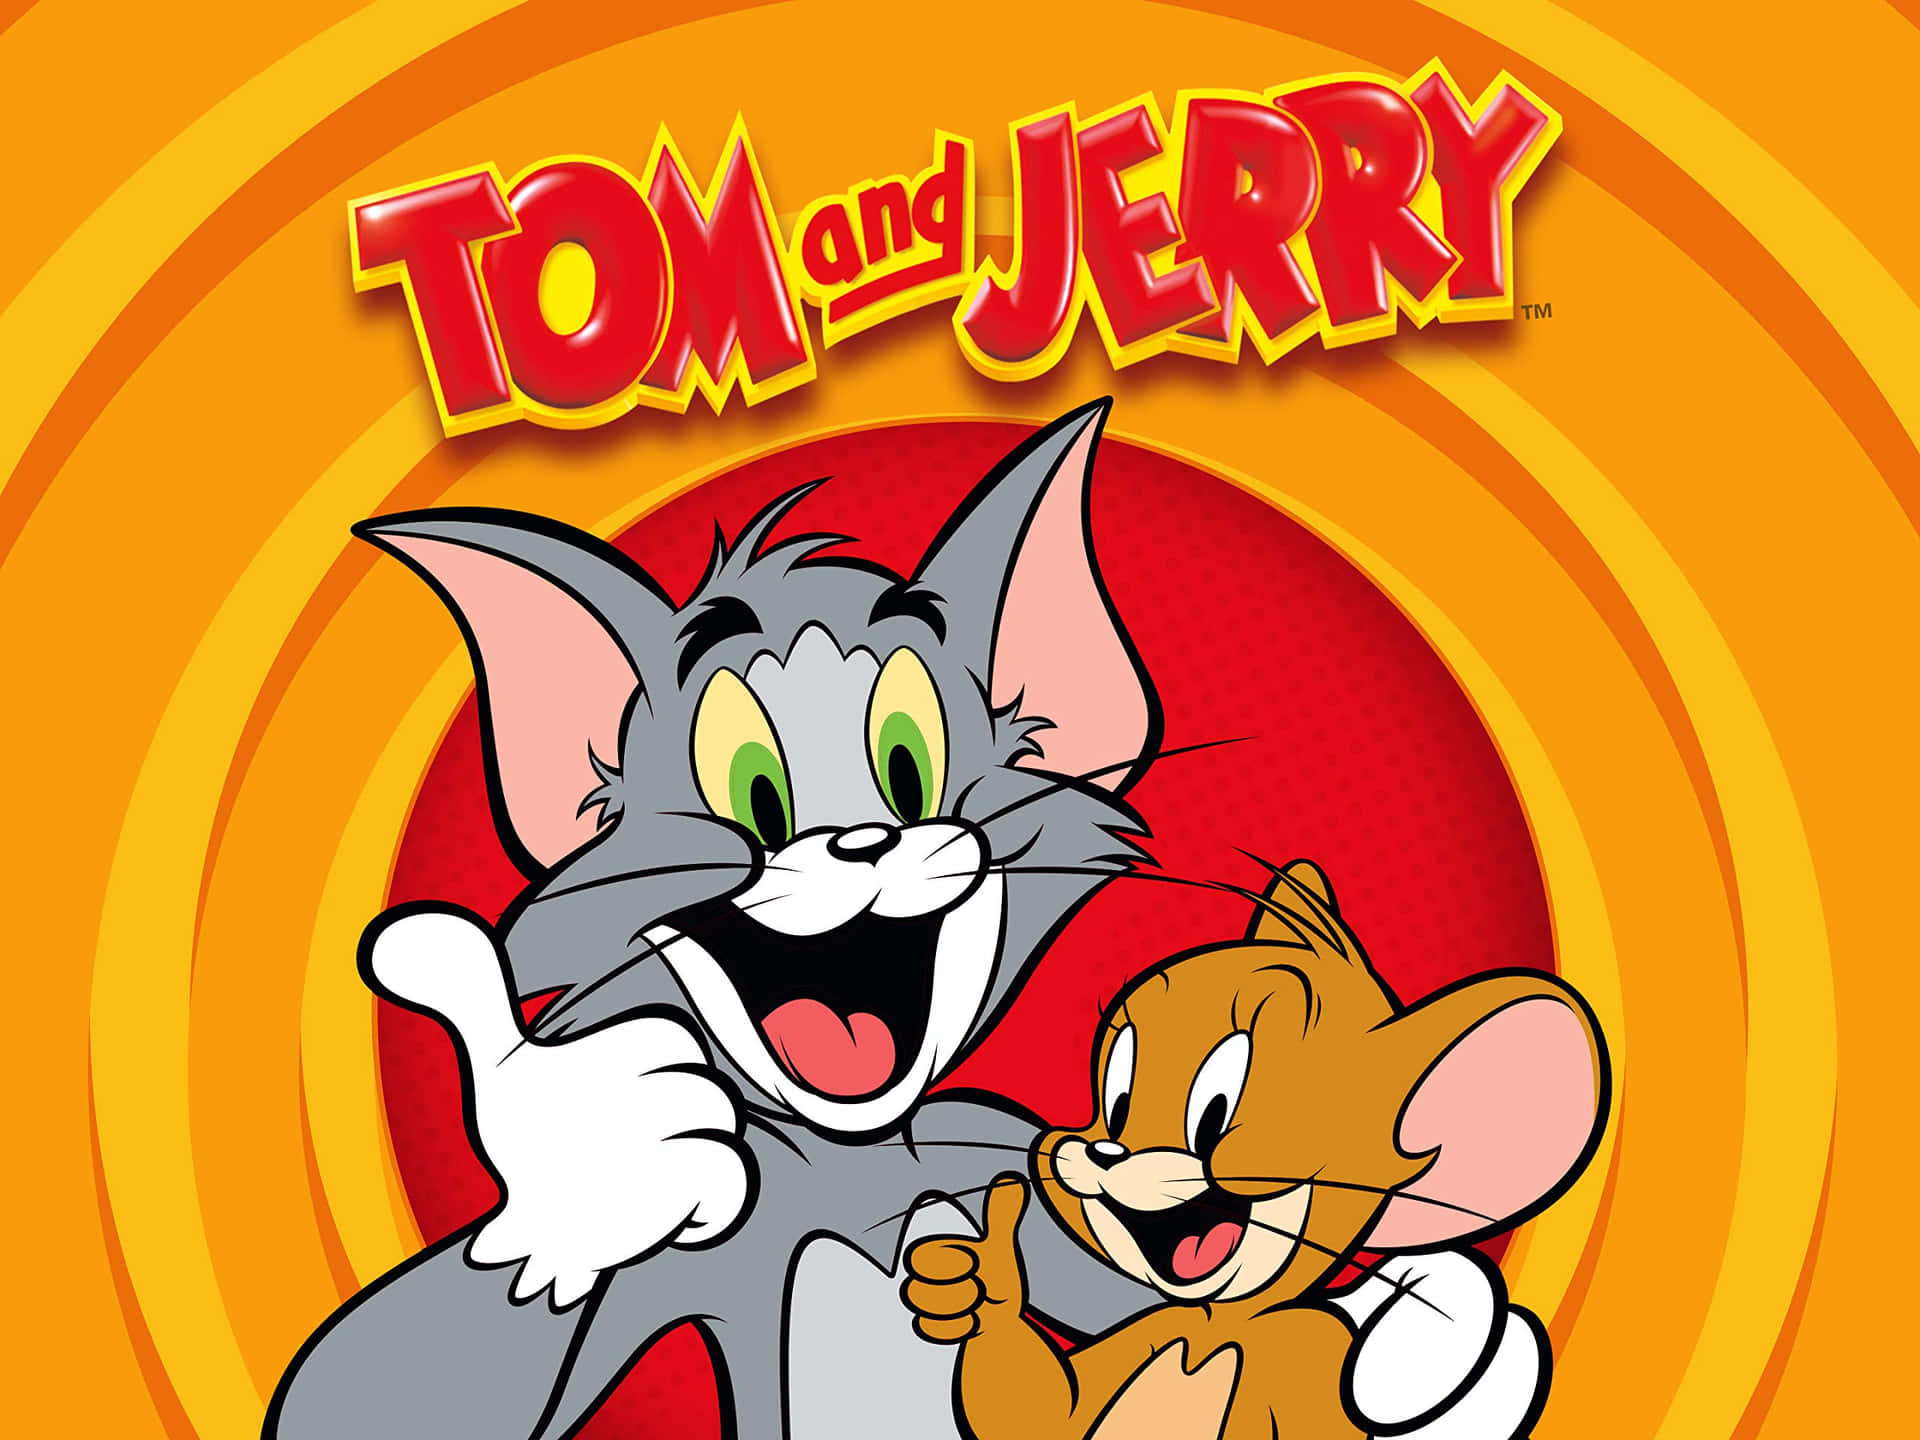 Tom and Jerry having a laugh